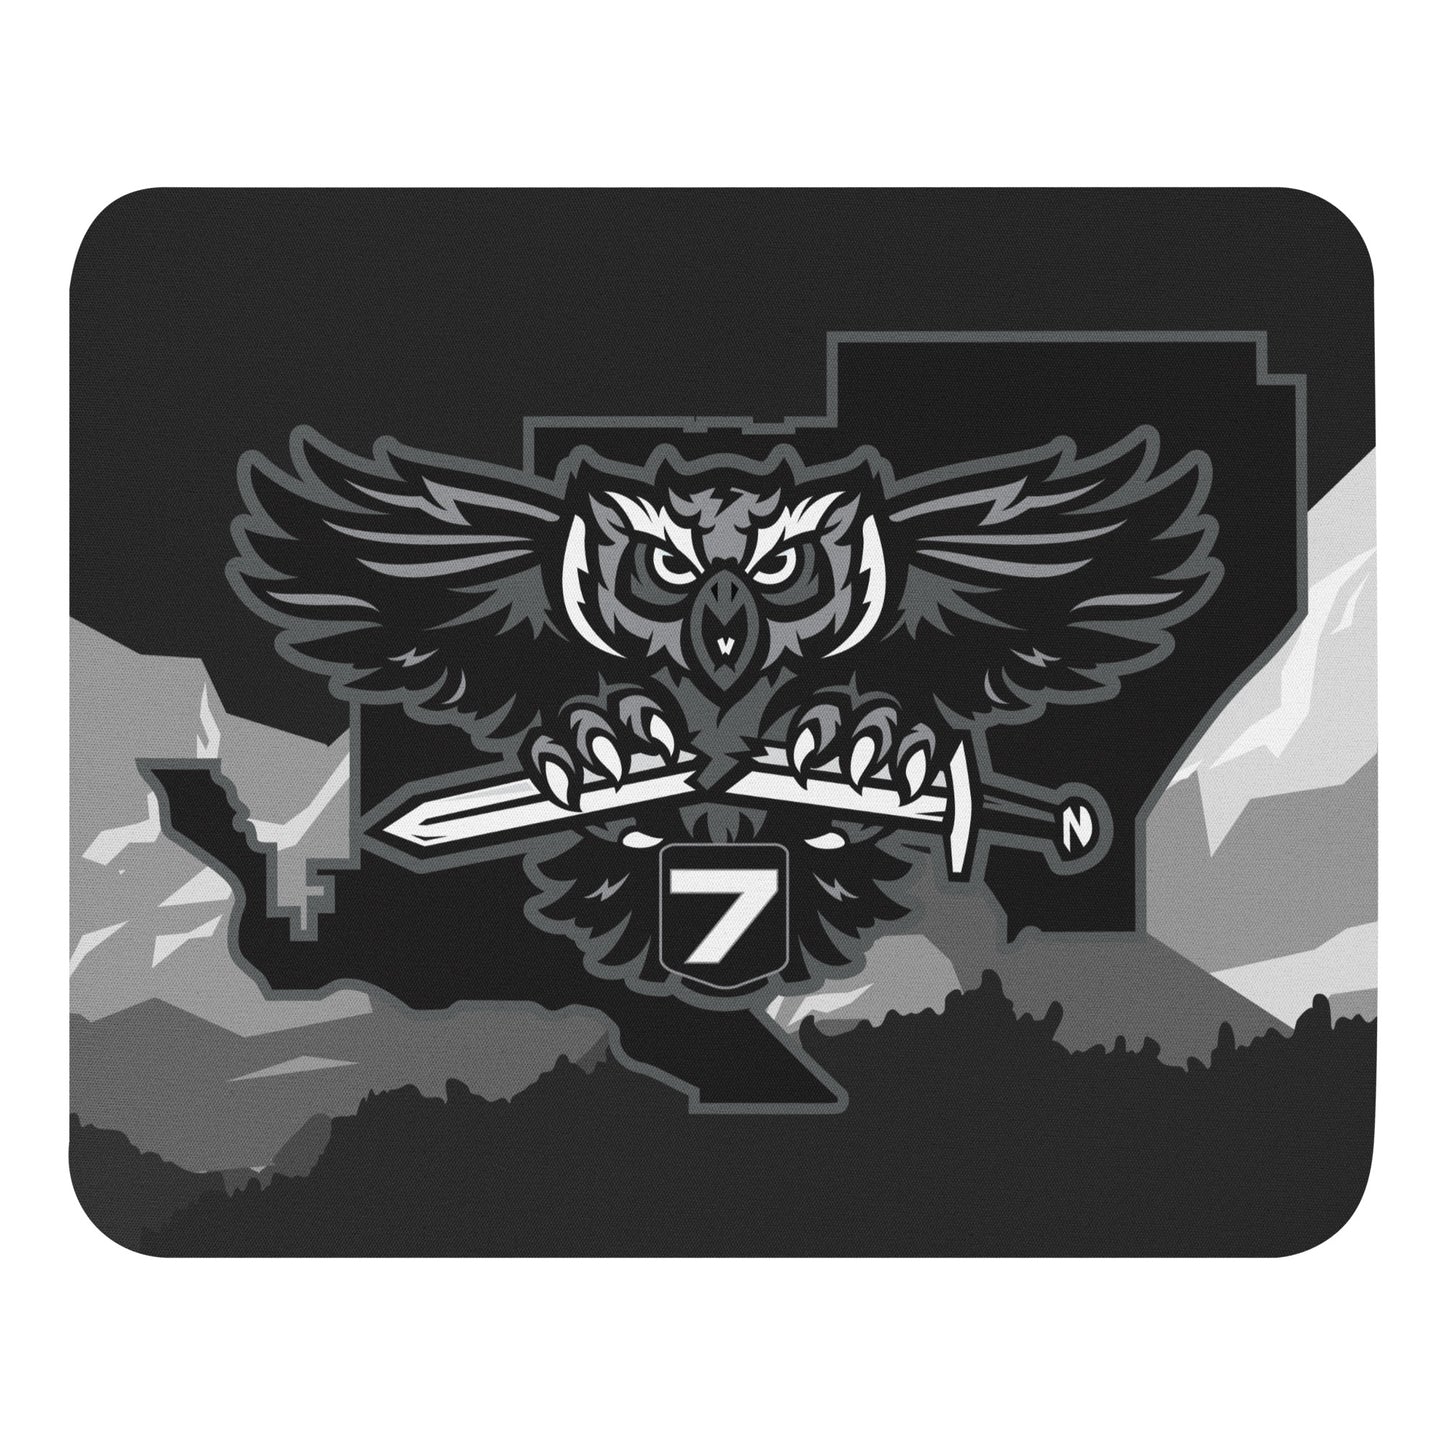 District 7 Mouse pad